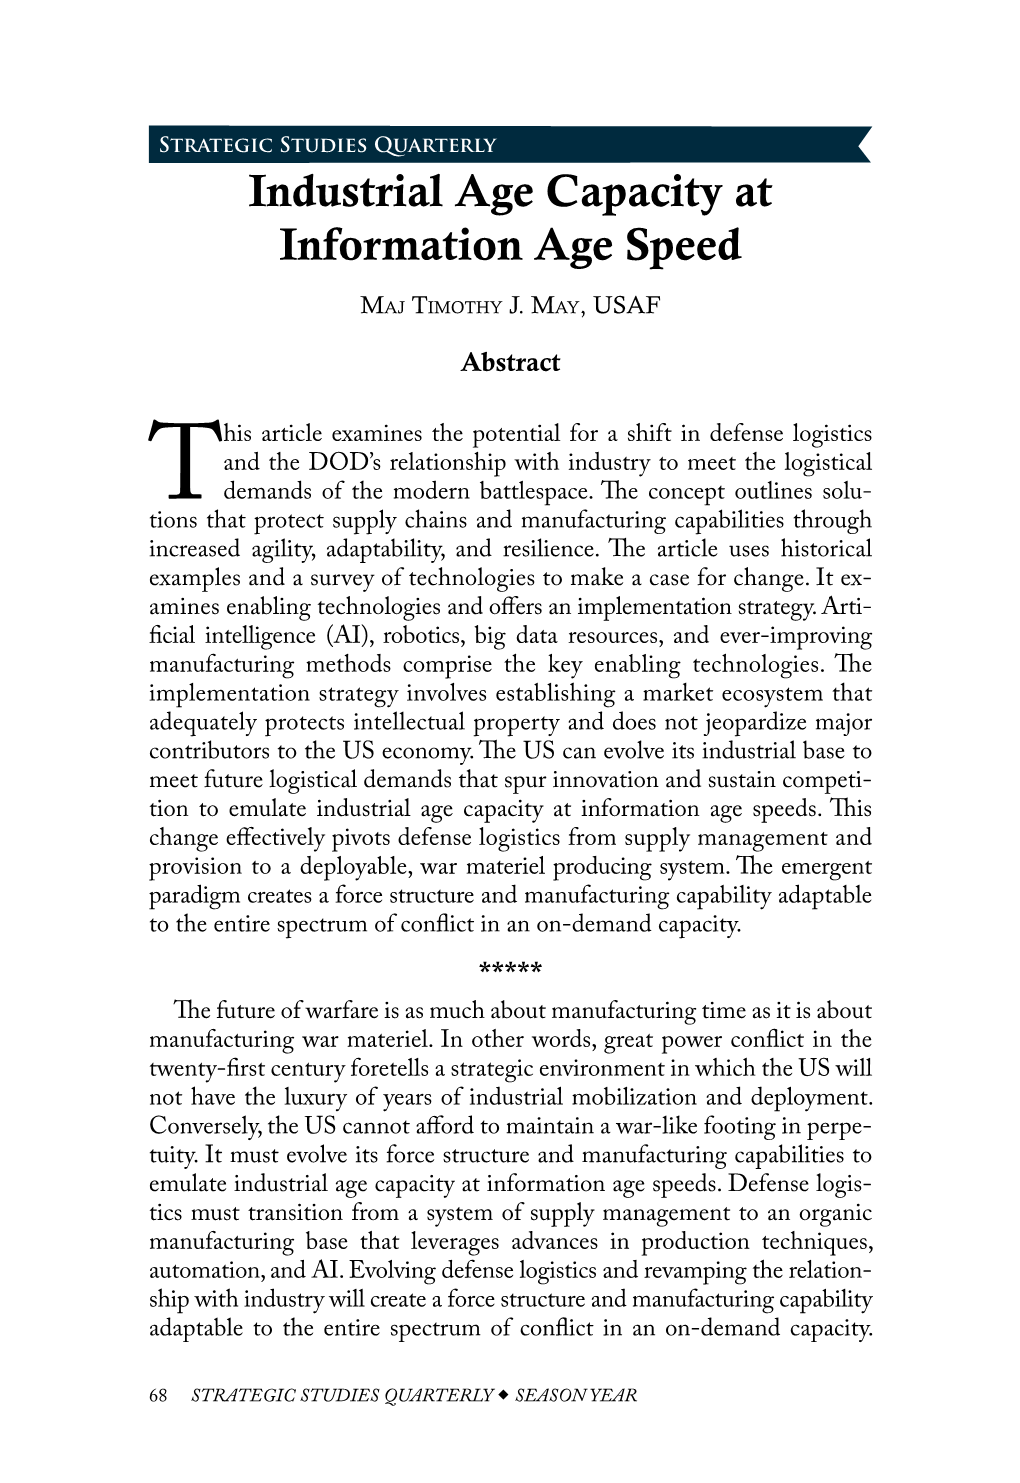 Industrial Age Capacity at Information Age Speed